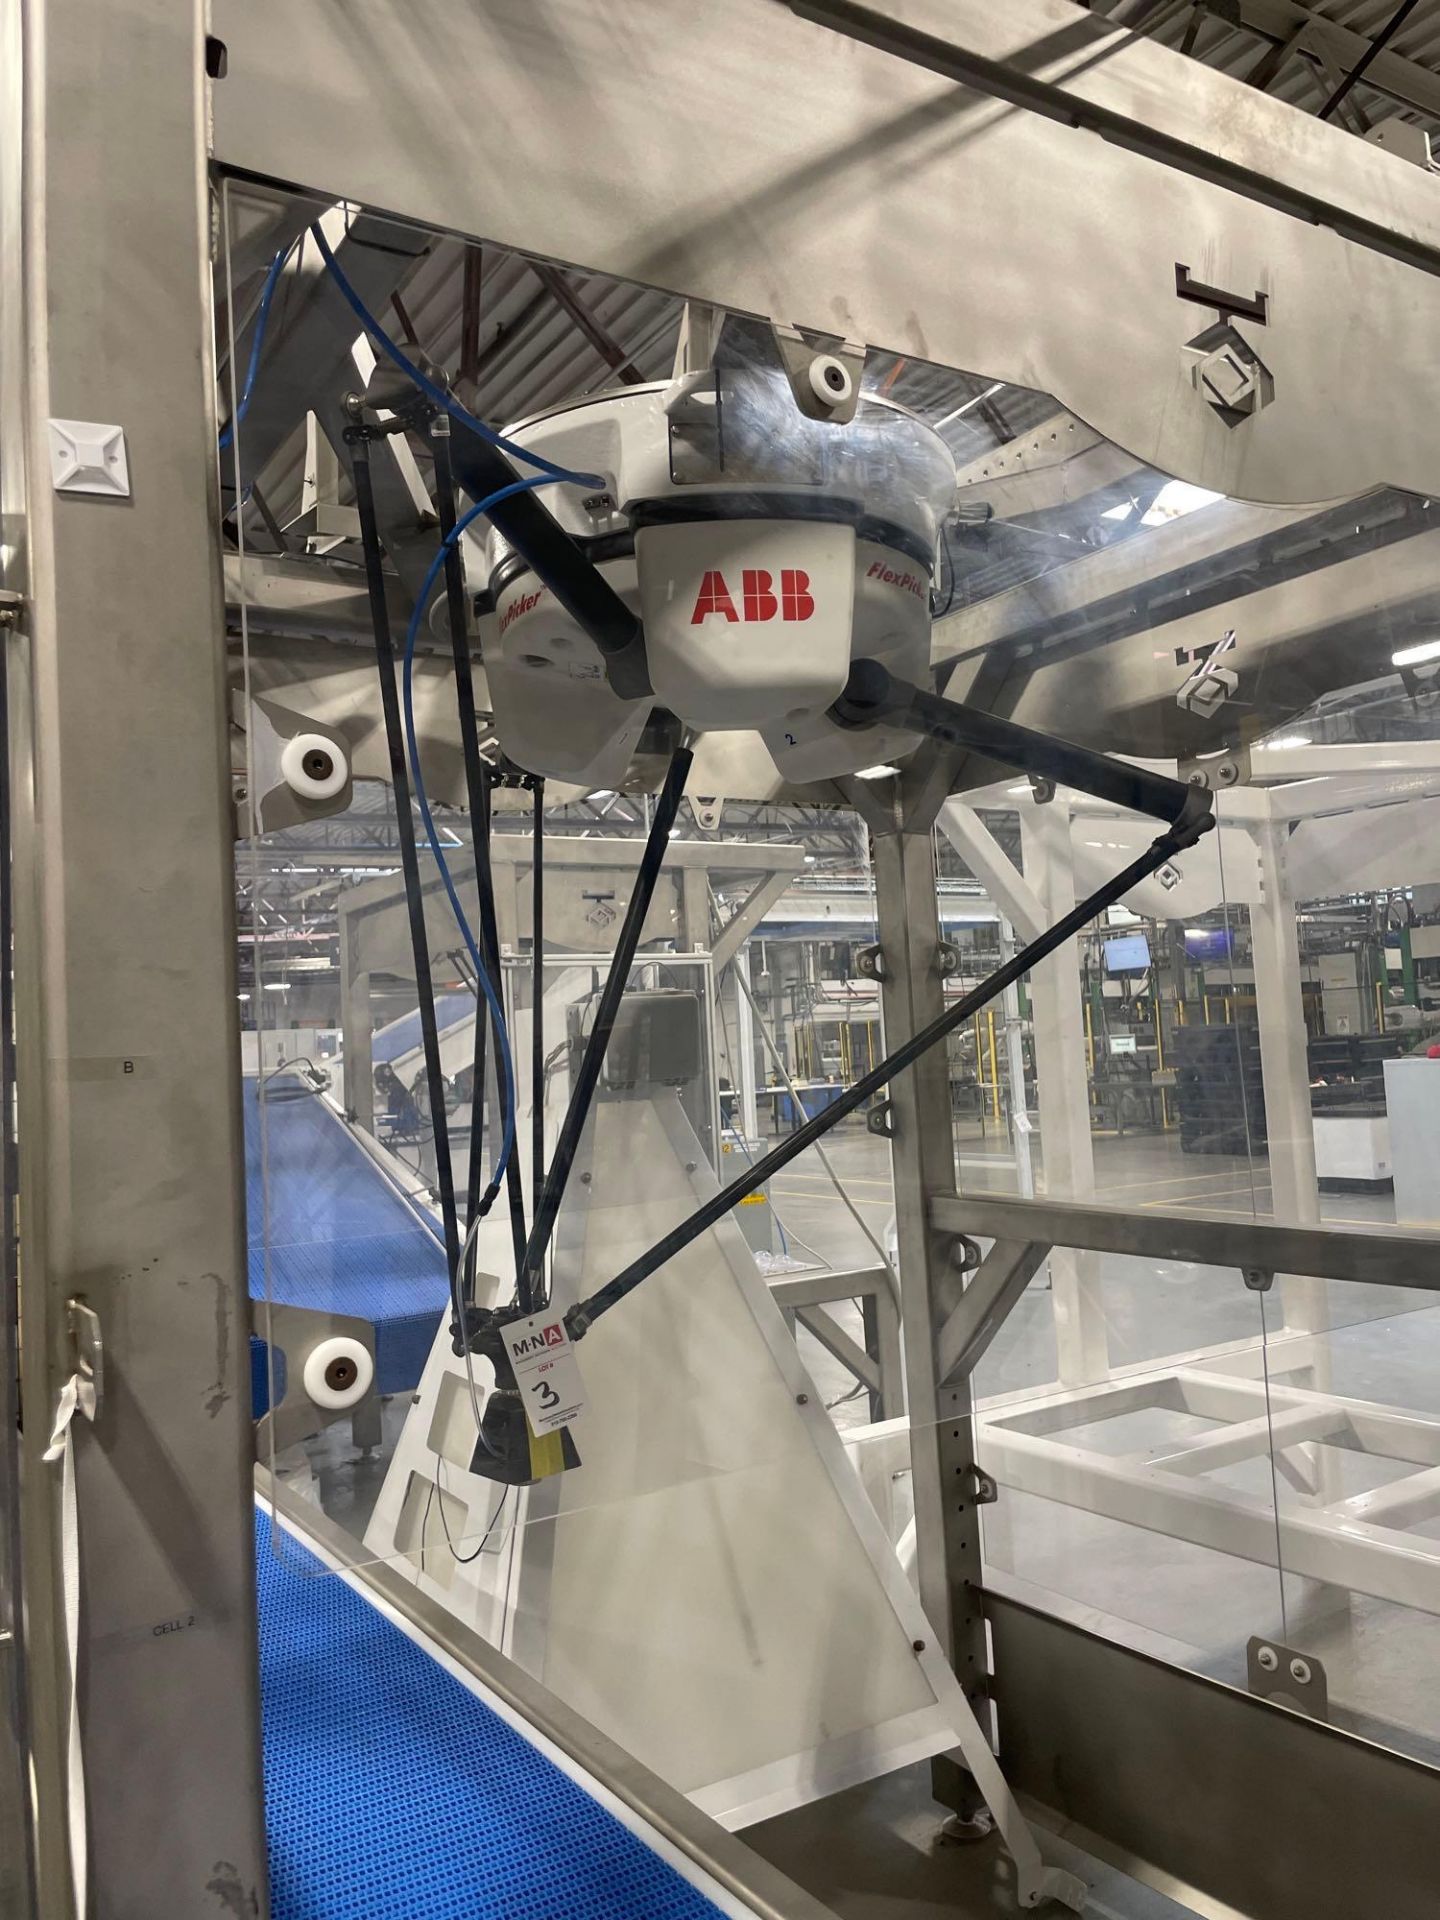 ABB Flexpicker IRB 360-6/1600 4-Axis Robot w/ 13.2lbs Payload, New 2020 - Image 3 of 9